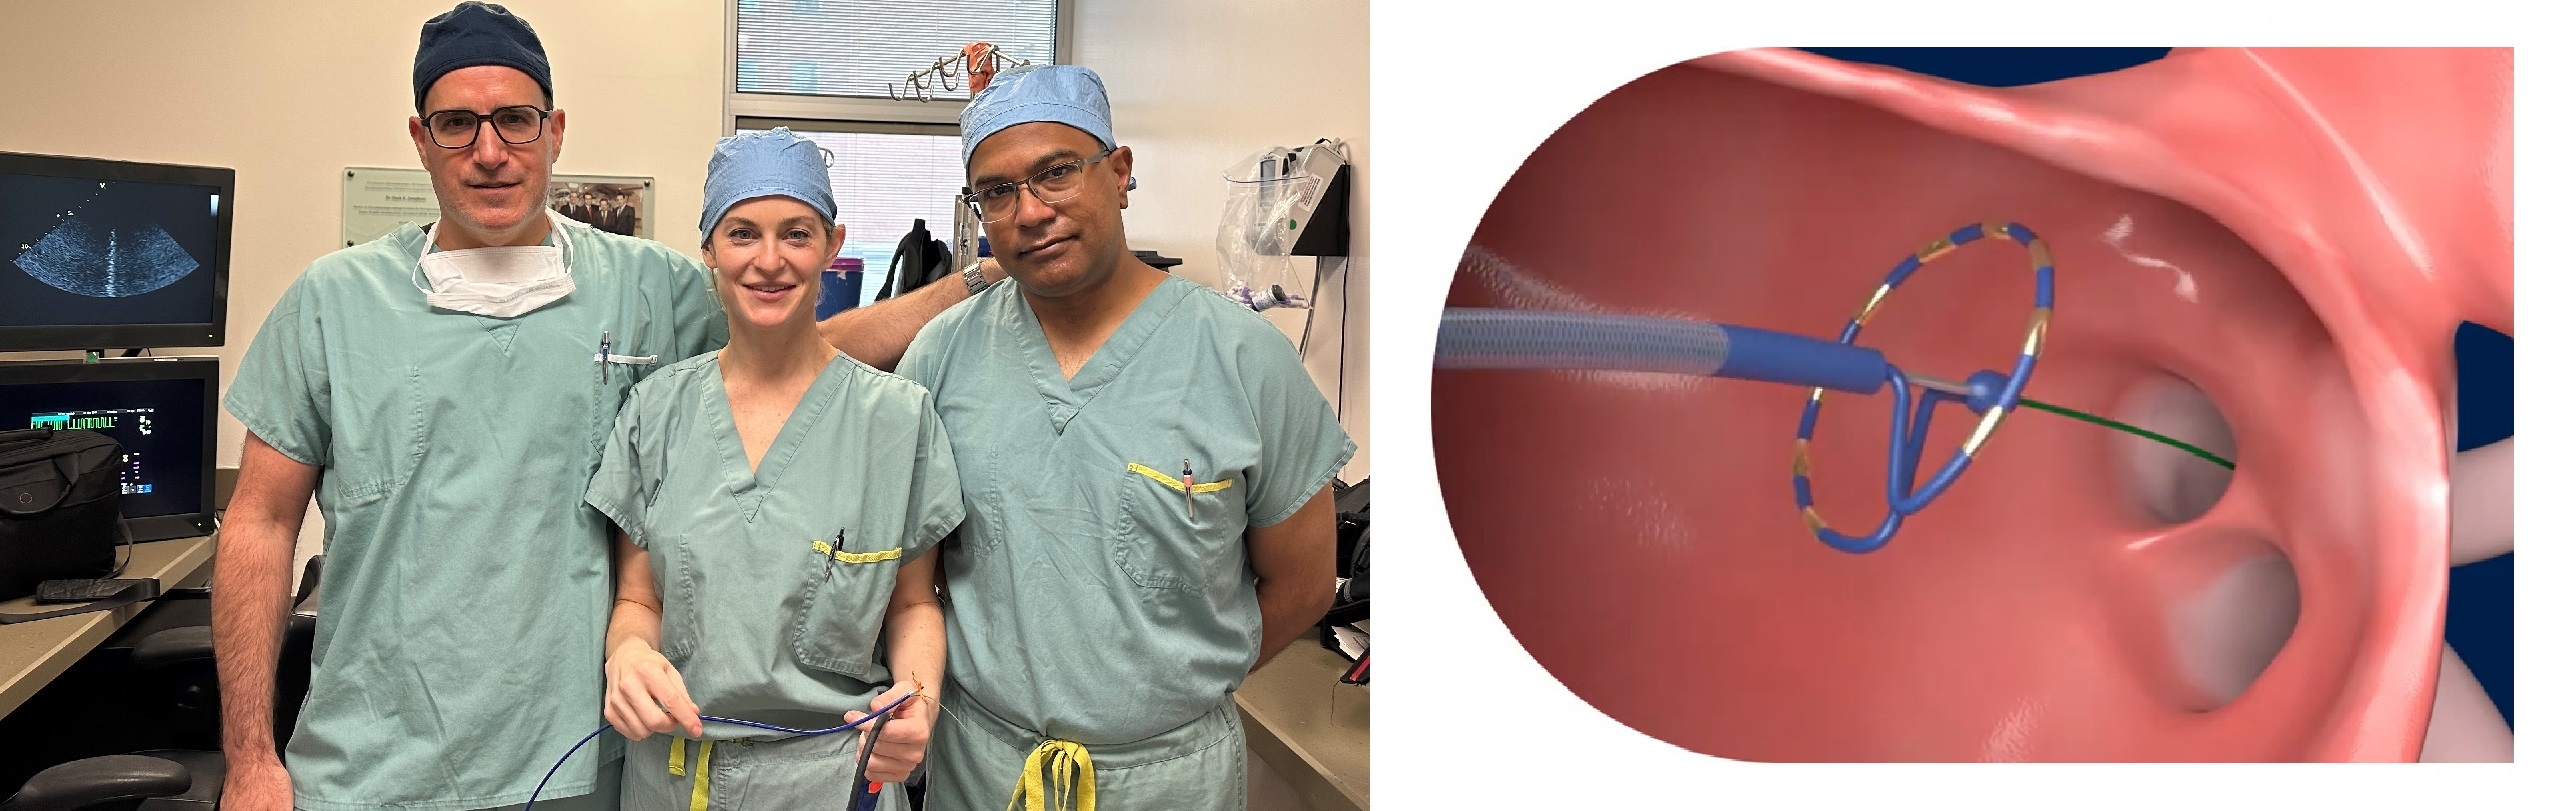 Dr. Vidal Essebag, Dr. Jacqueline Joza and Dr. Atul Verma (L), The Medtronic PulseSelectTM Pulsed Field Ablation (PFA) System (R)